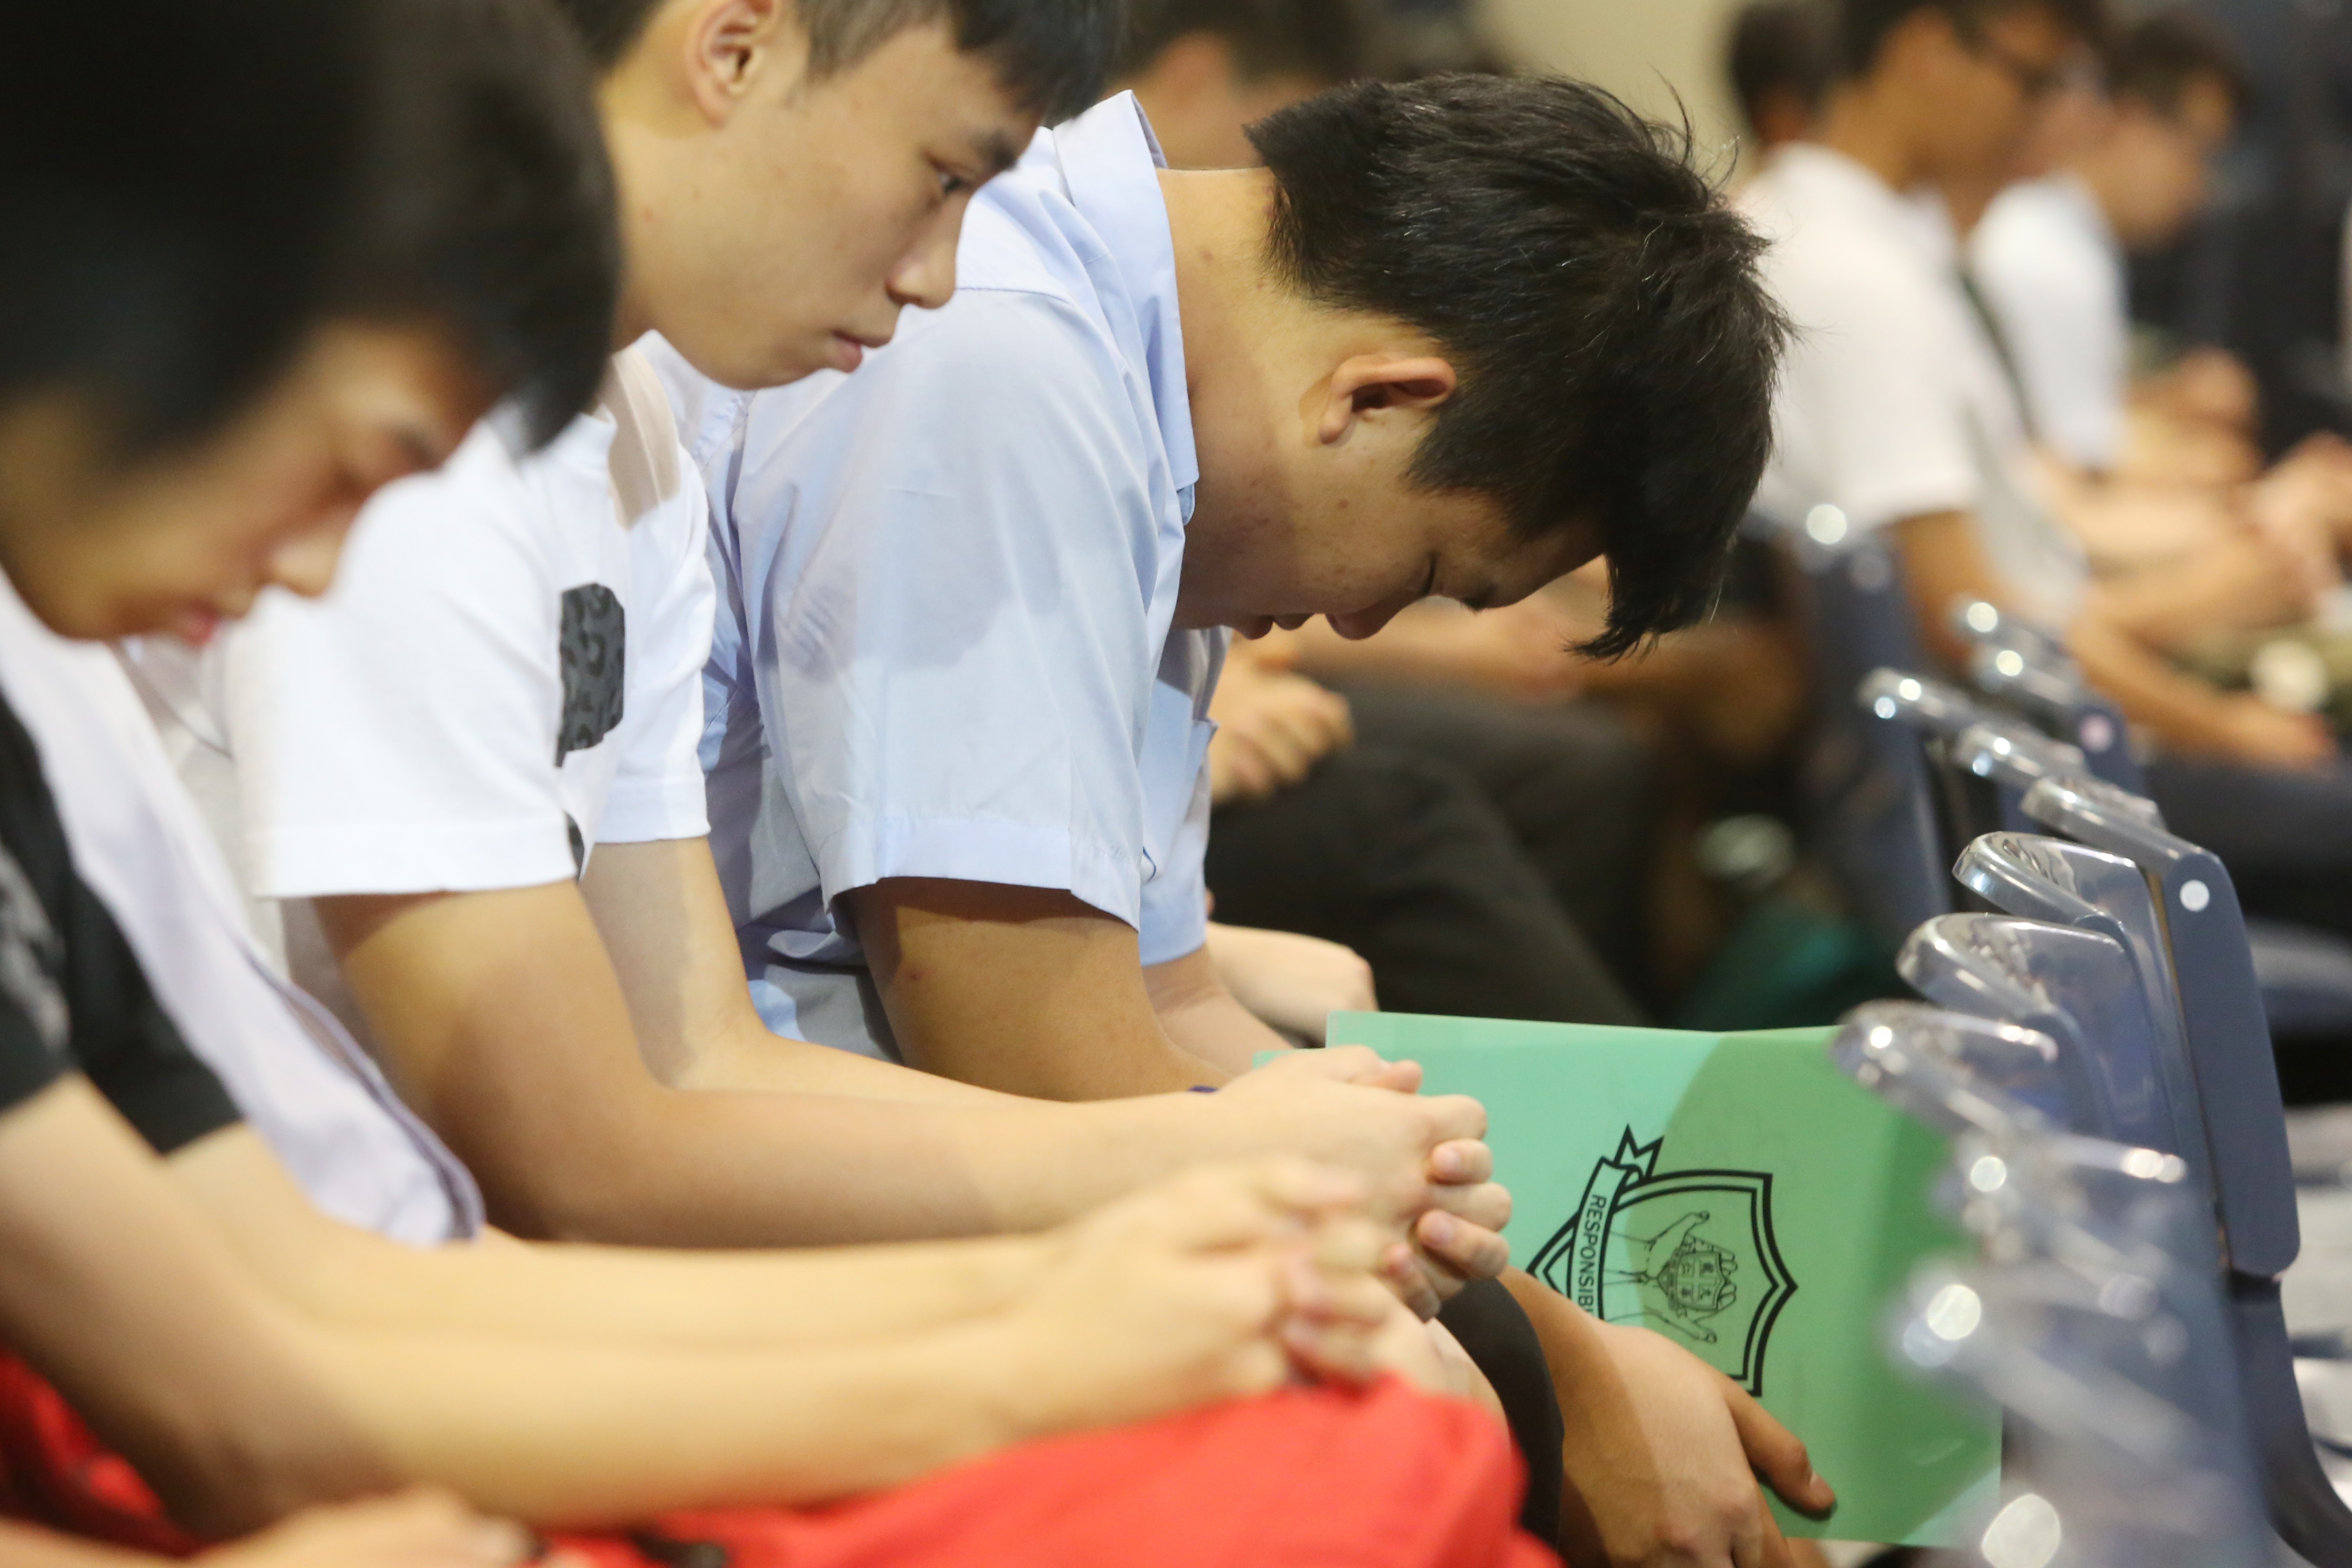 Results day of public exams can easily be one of the most stressful days for students in Hong Kong.